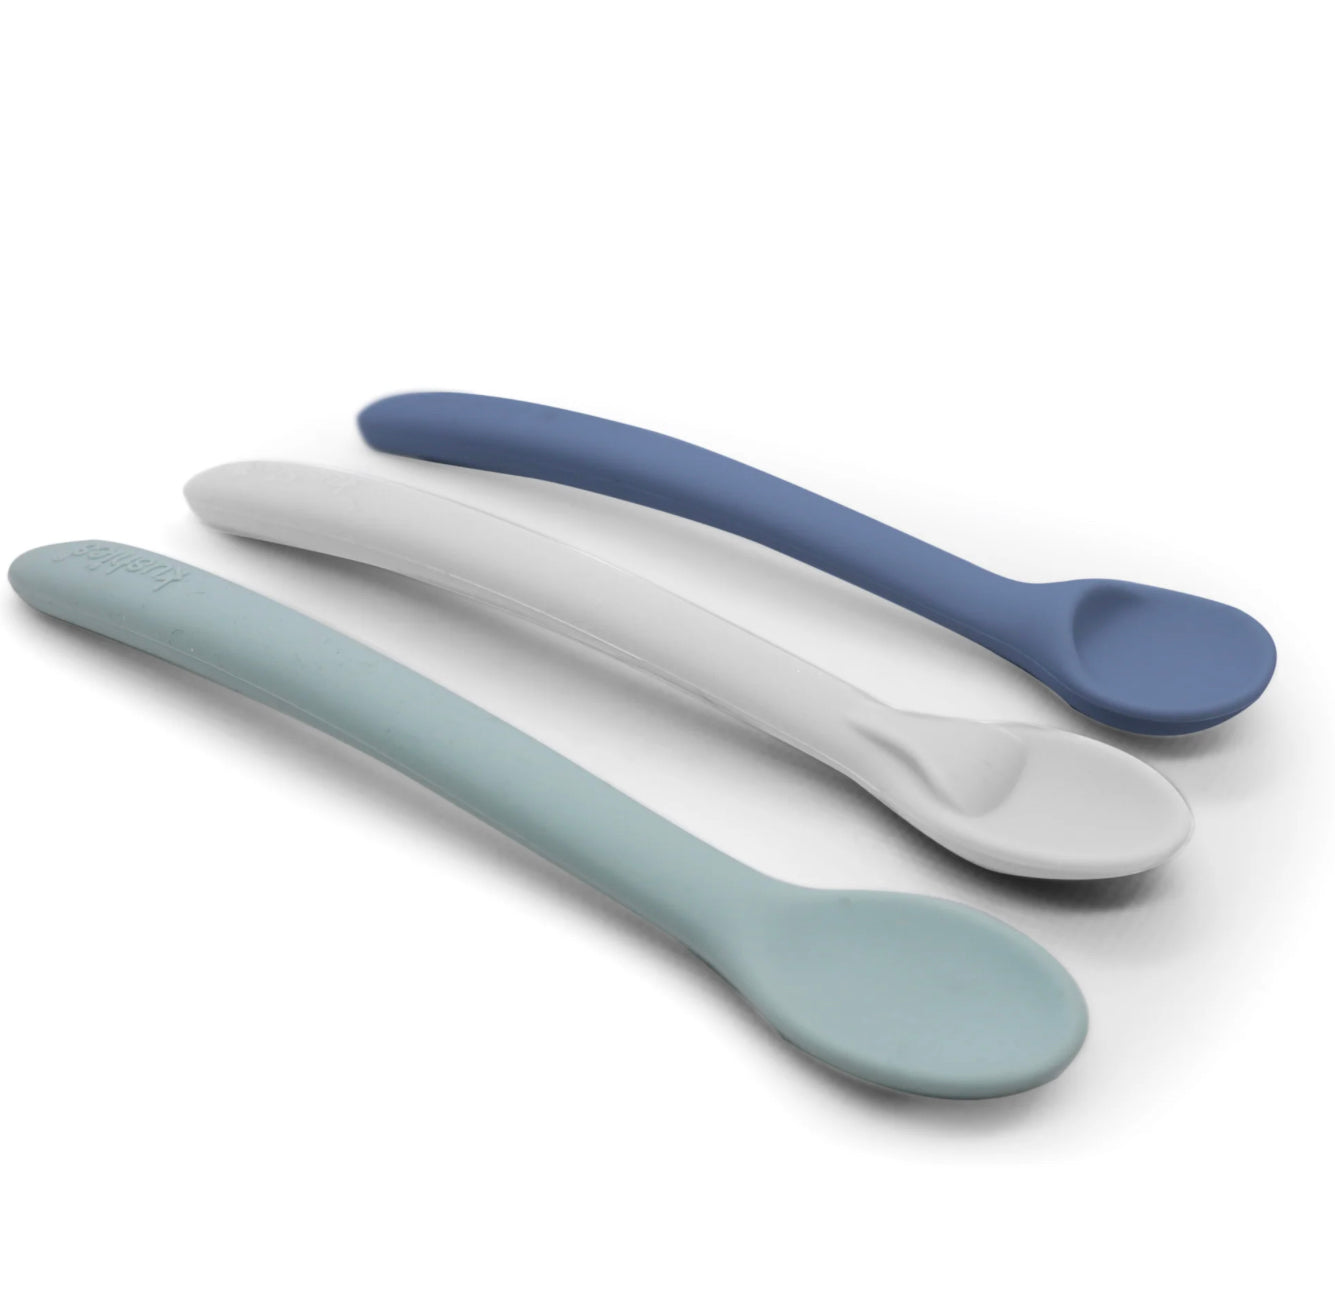 Kushies-Silistages Spoon Set Of 3